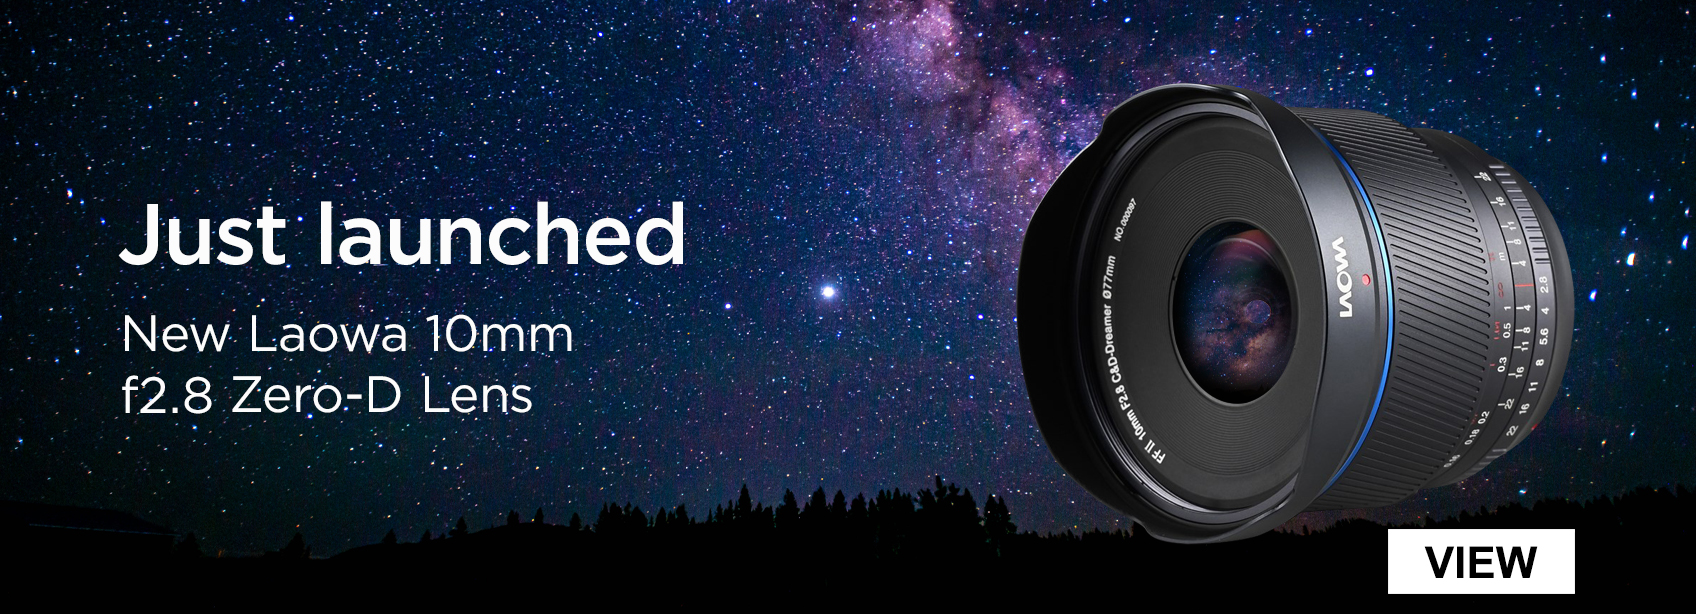 Just launched. New Laowa 10mm f2.8 Zero-D Lens 